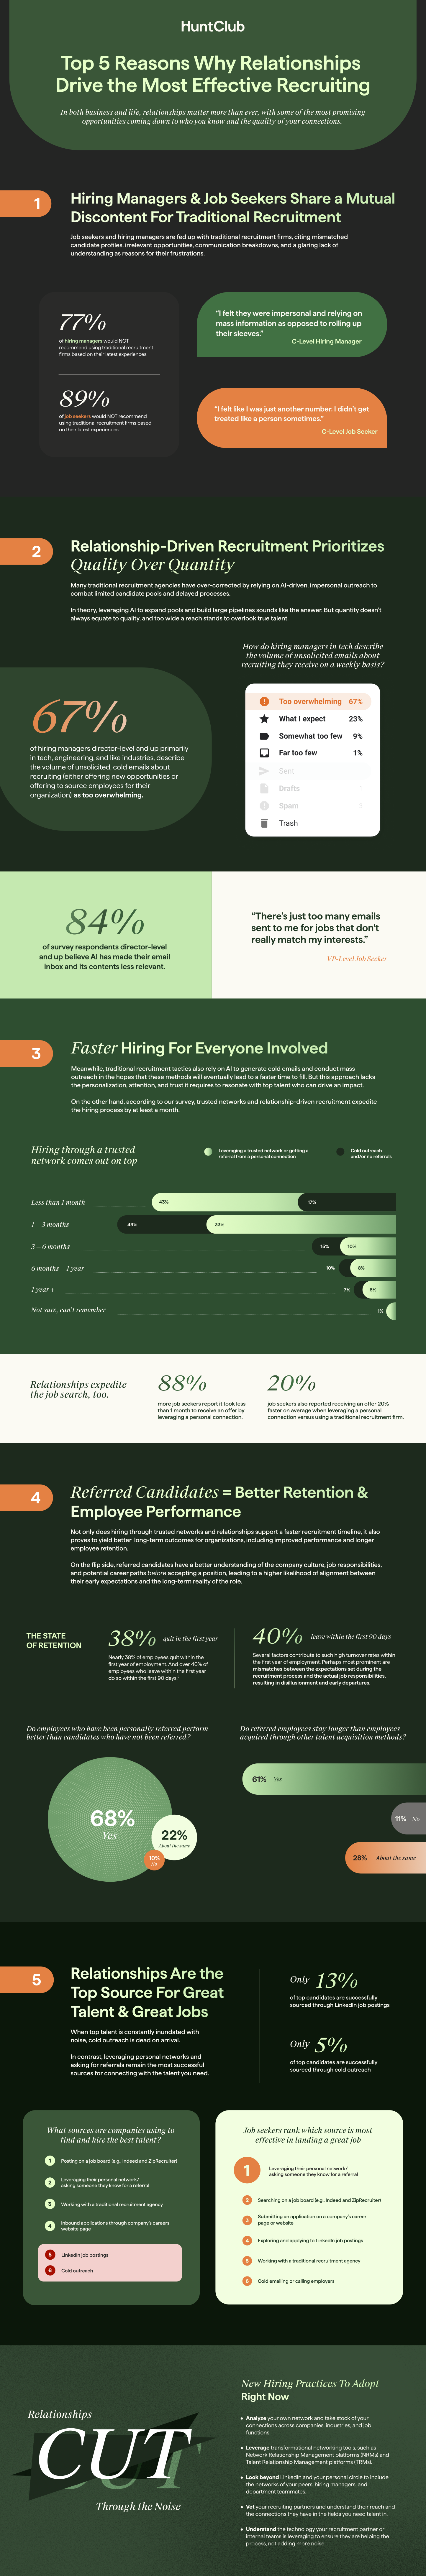 Large Hunt Club branded infographic outlining the Top 5 Reasons Why Relationships Drive The Most Effective Recruiting with statistics to support throughout the infographic